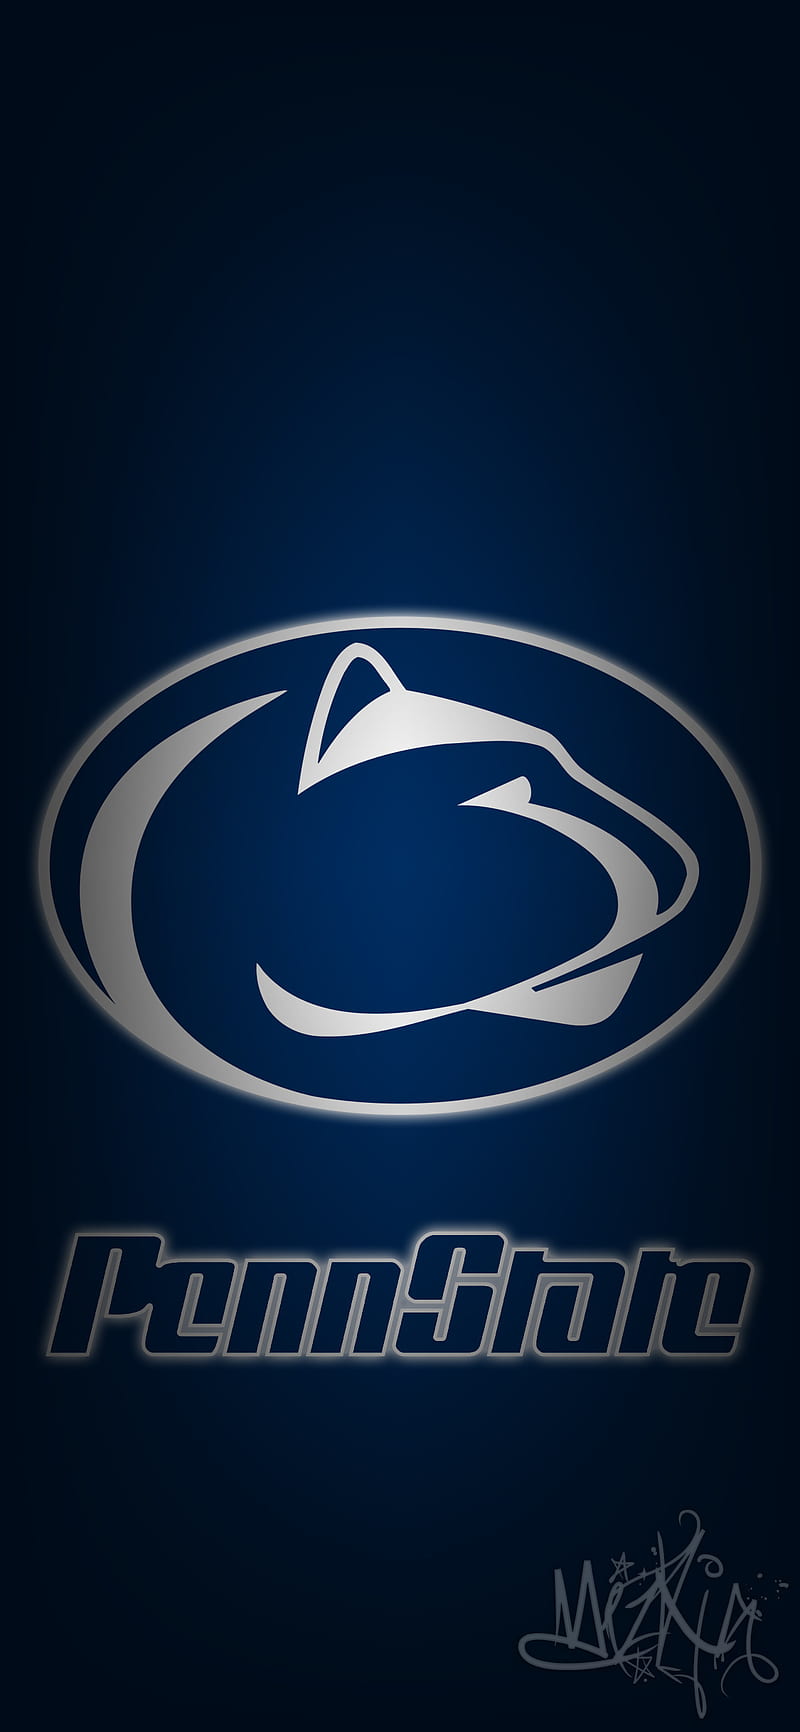 Penn State Blue, happy valley, nittany lions, penn state, pennsylvania, state college, white, HD phone wallpaper